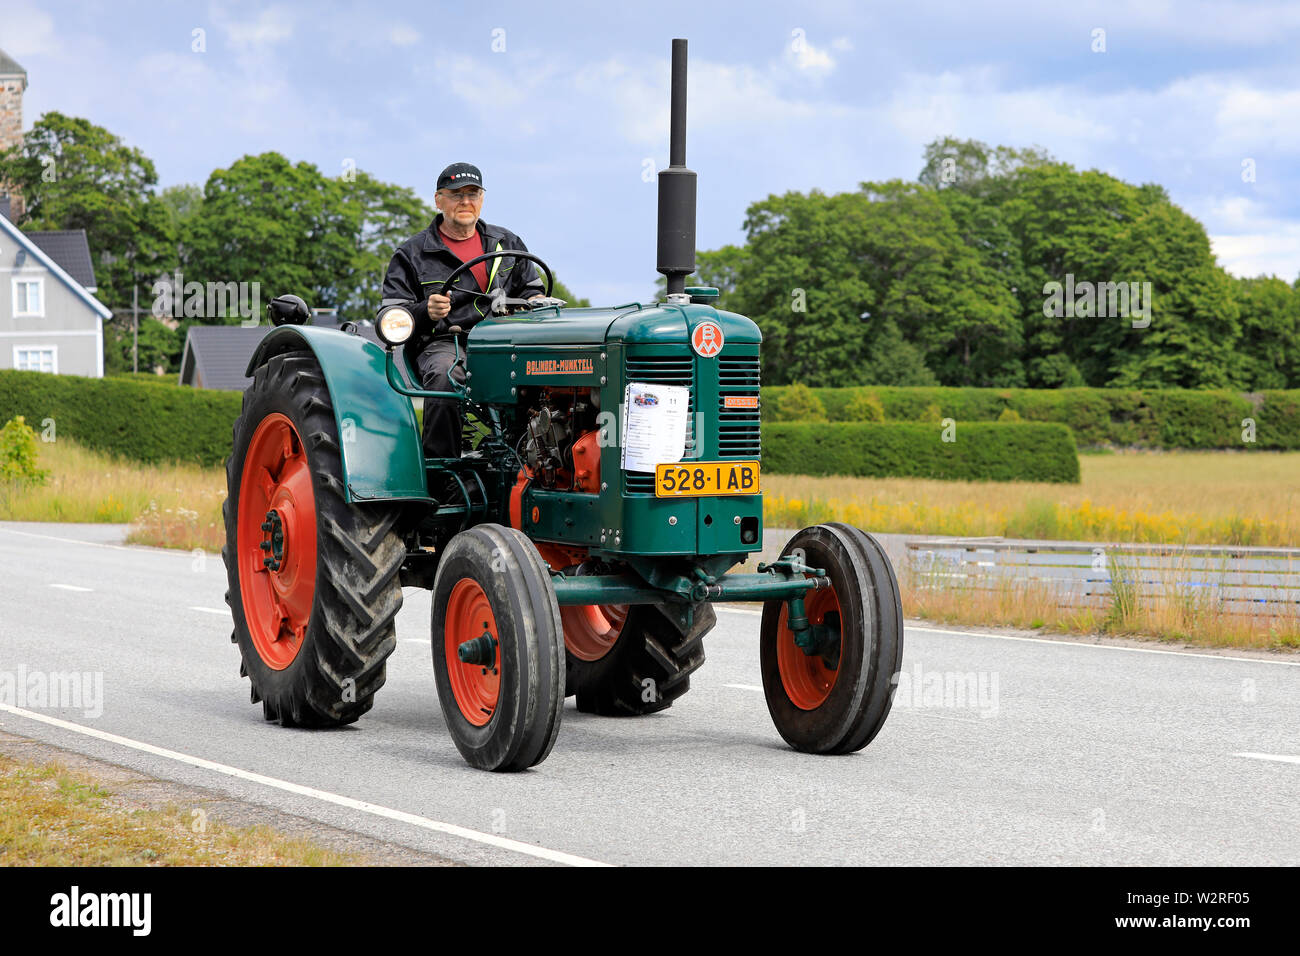 Kimito, Finland. July 6, 2019. Bolinder-Munktell tractor year 1956 and driver on Kimito Traktorkavalkad, annual vintage tractor show and parade. Stock Photo